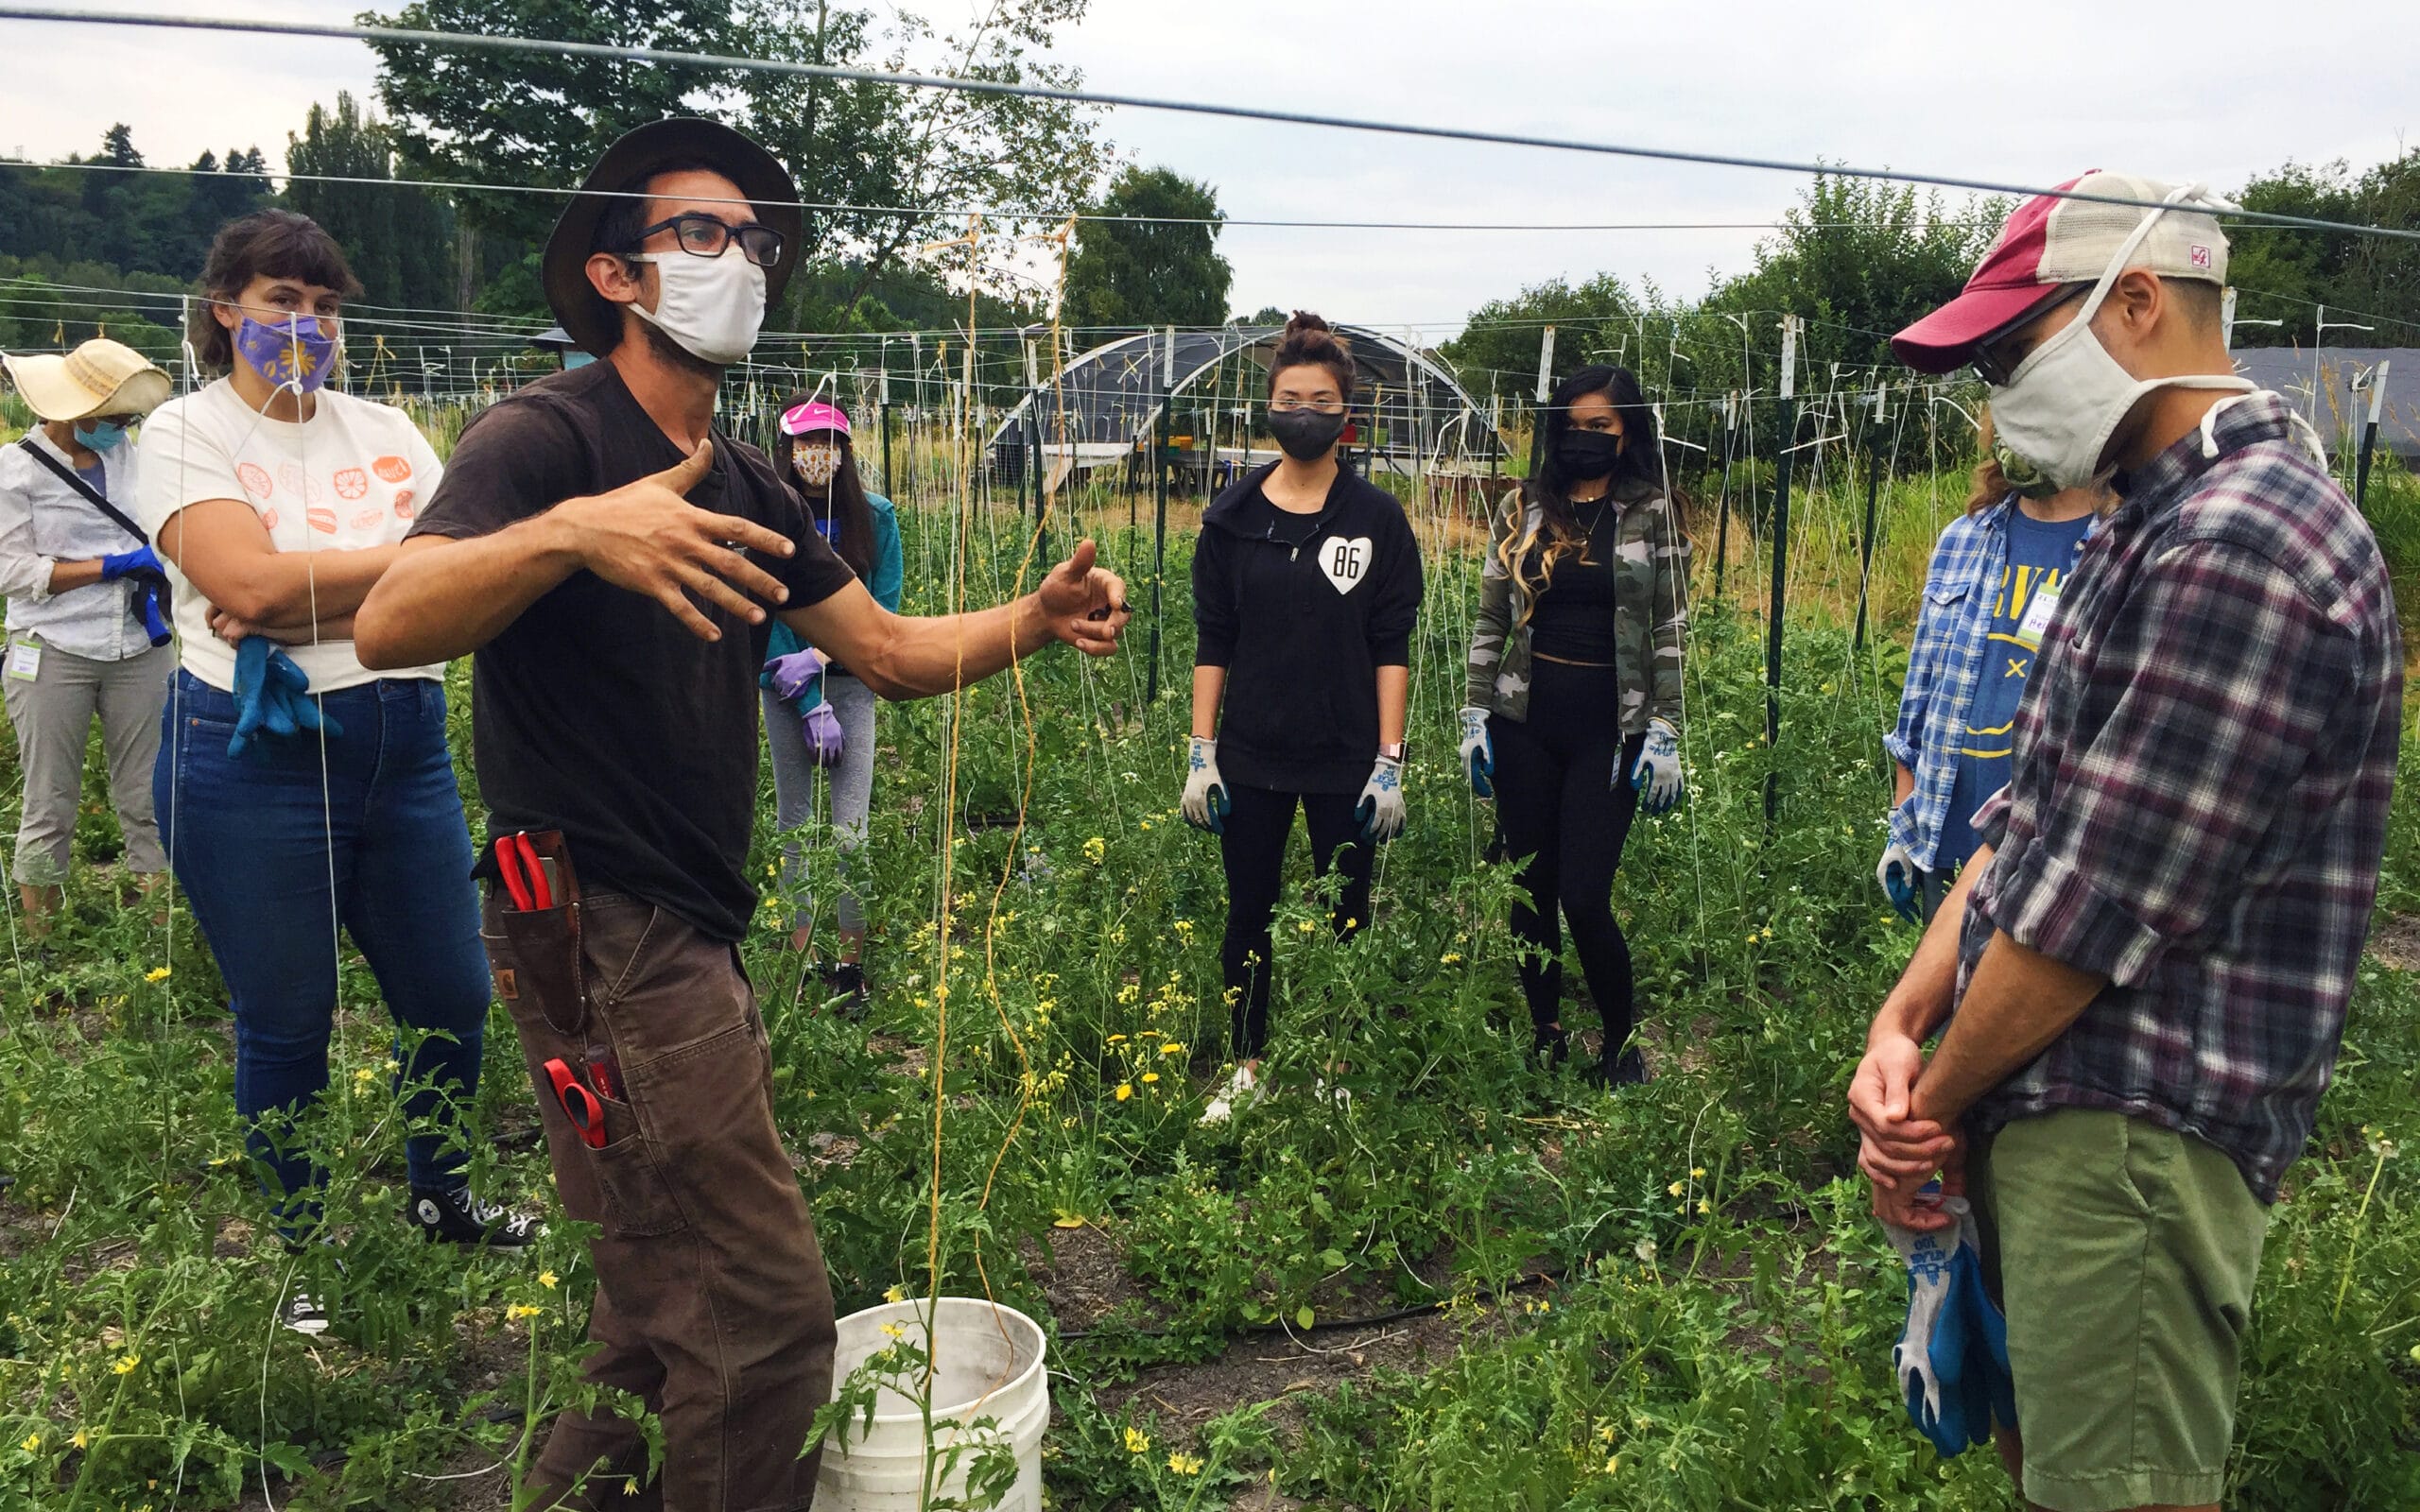 Anthony Reyes leading a farm tour to a group of volunteers who are working on stringing up tomatoes on the farm.